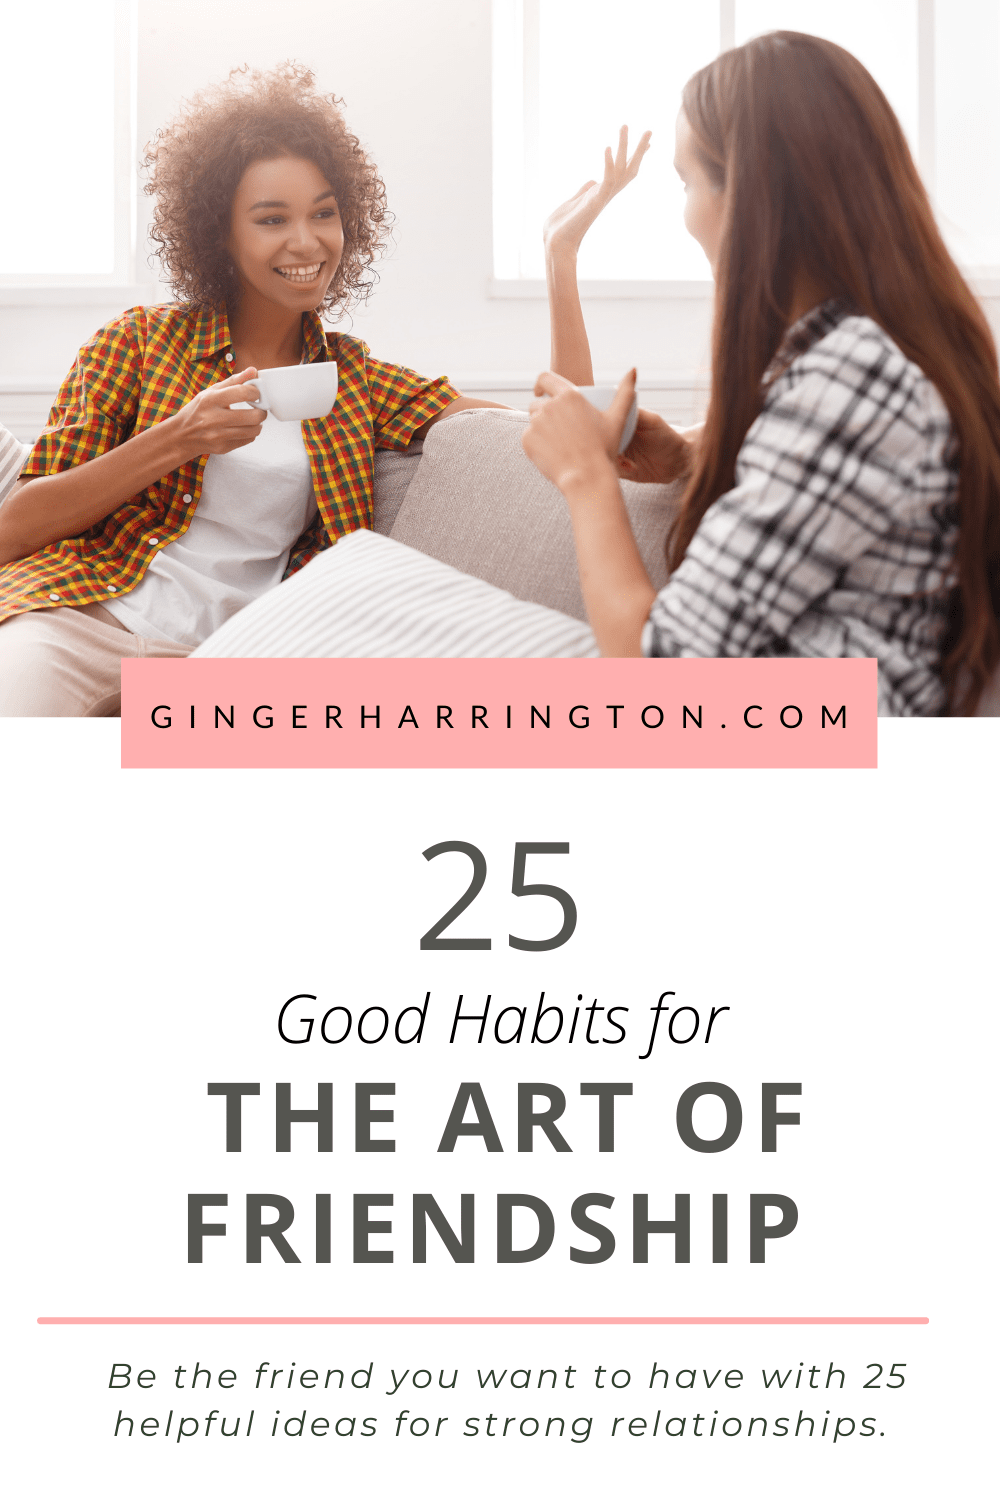 Two women sit on sofa, drink coffee, and talk. Image demonstrates title of blog post on how to be a good friend.